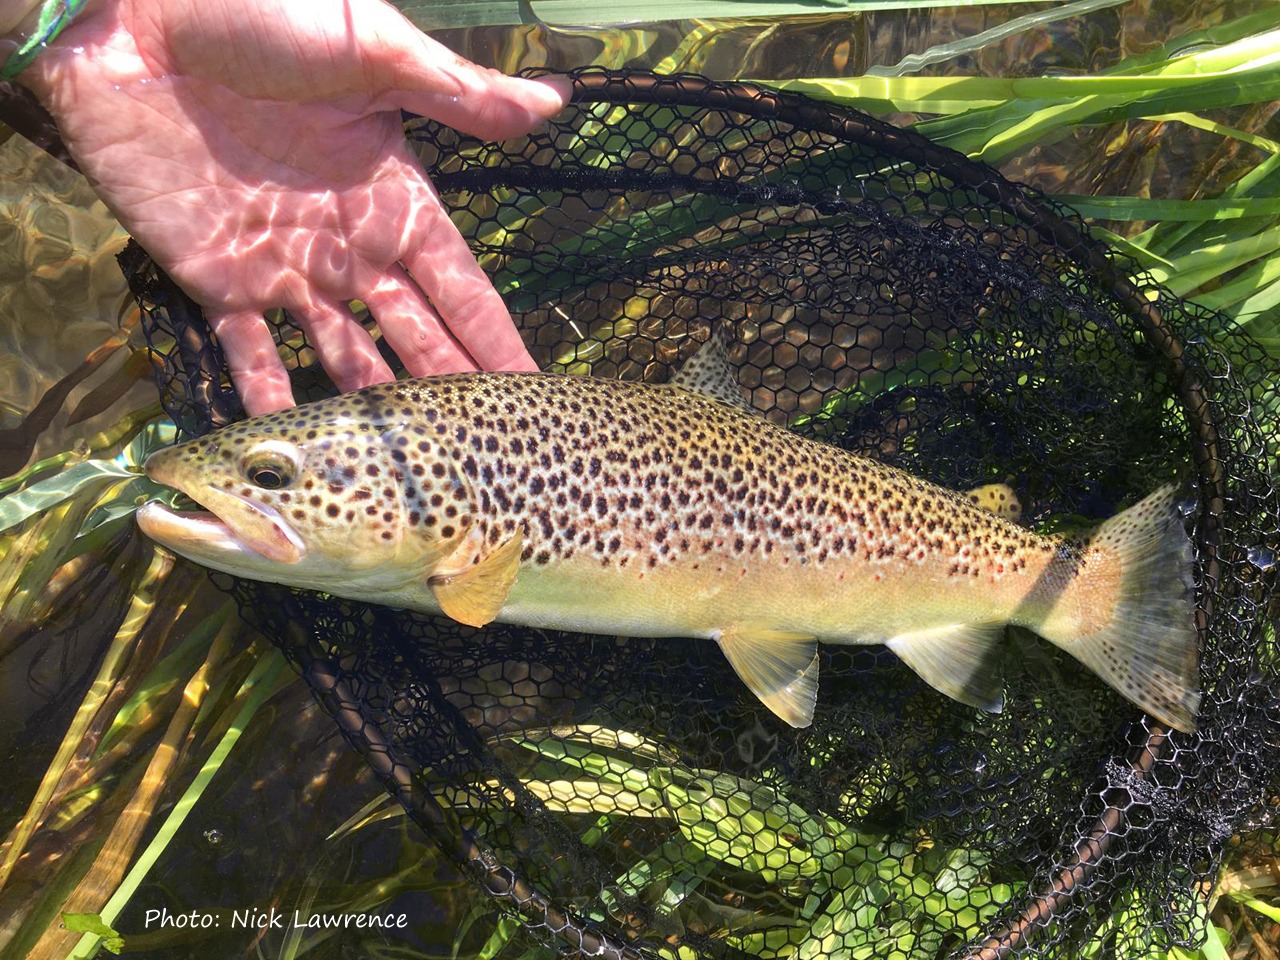 Wild Trout caught by Nick Lawrence